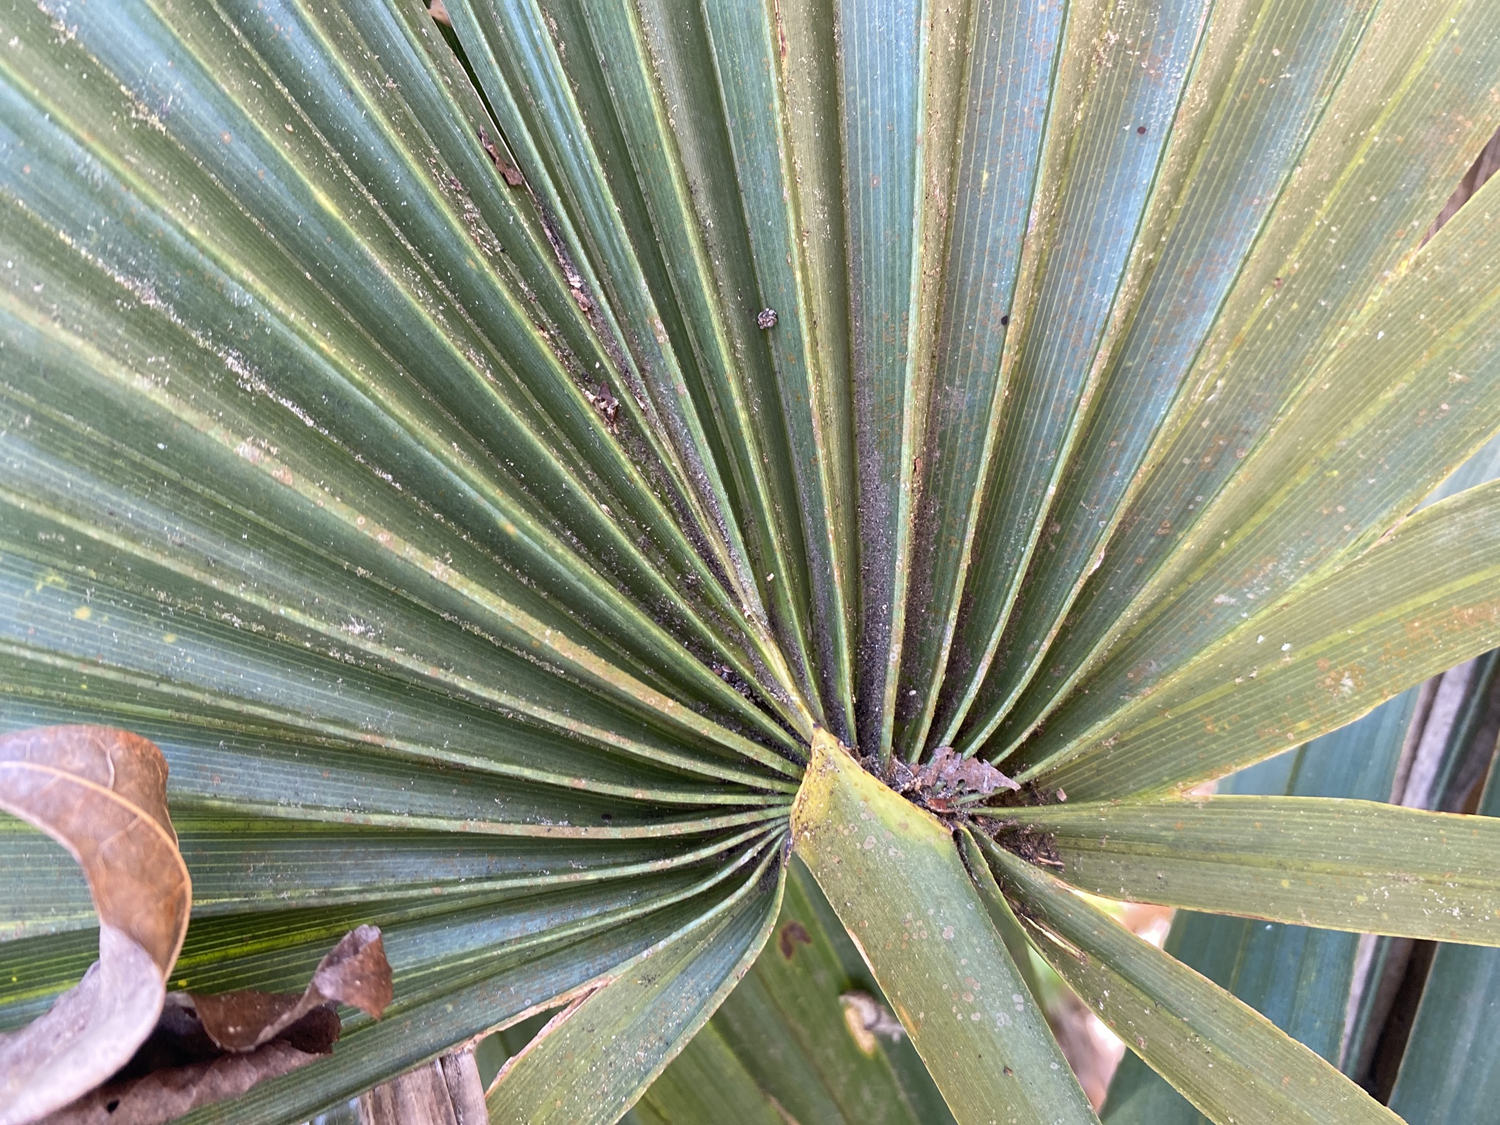 Color photograph of the base of a palmetto leaf showing veins radiating from the petiole. The leaf blade is plicate (folded).